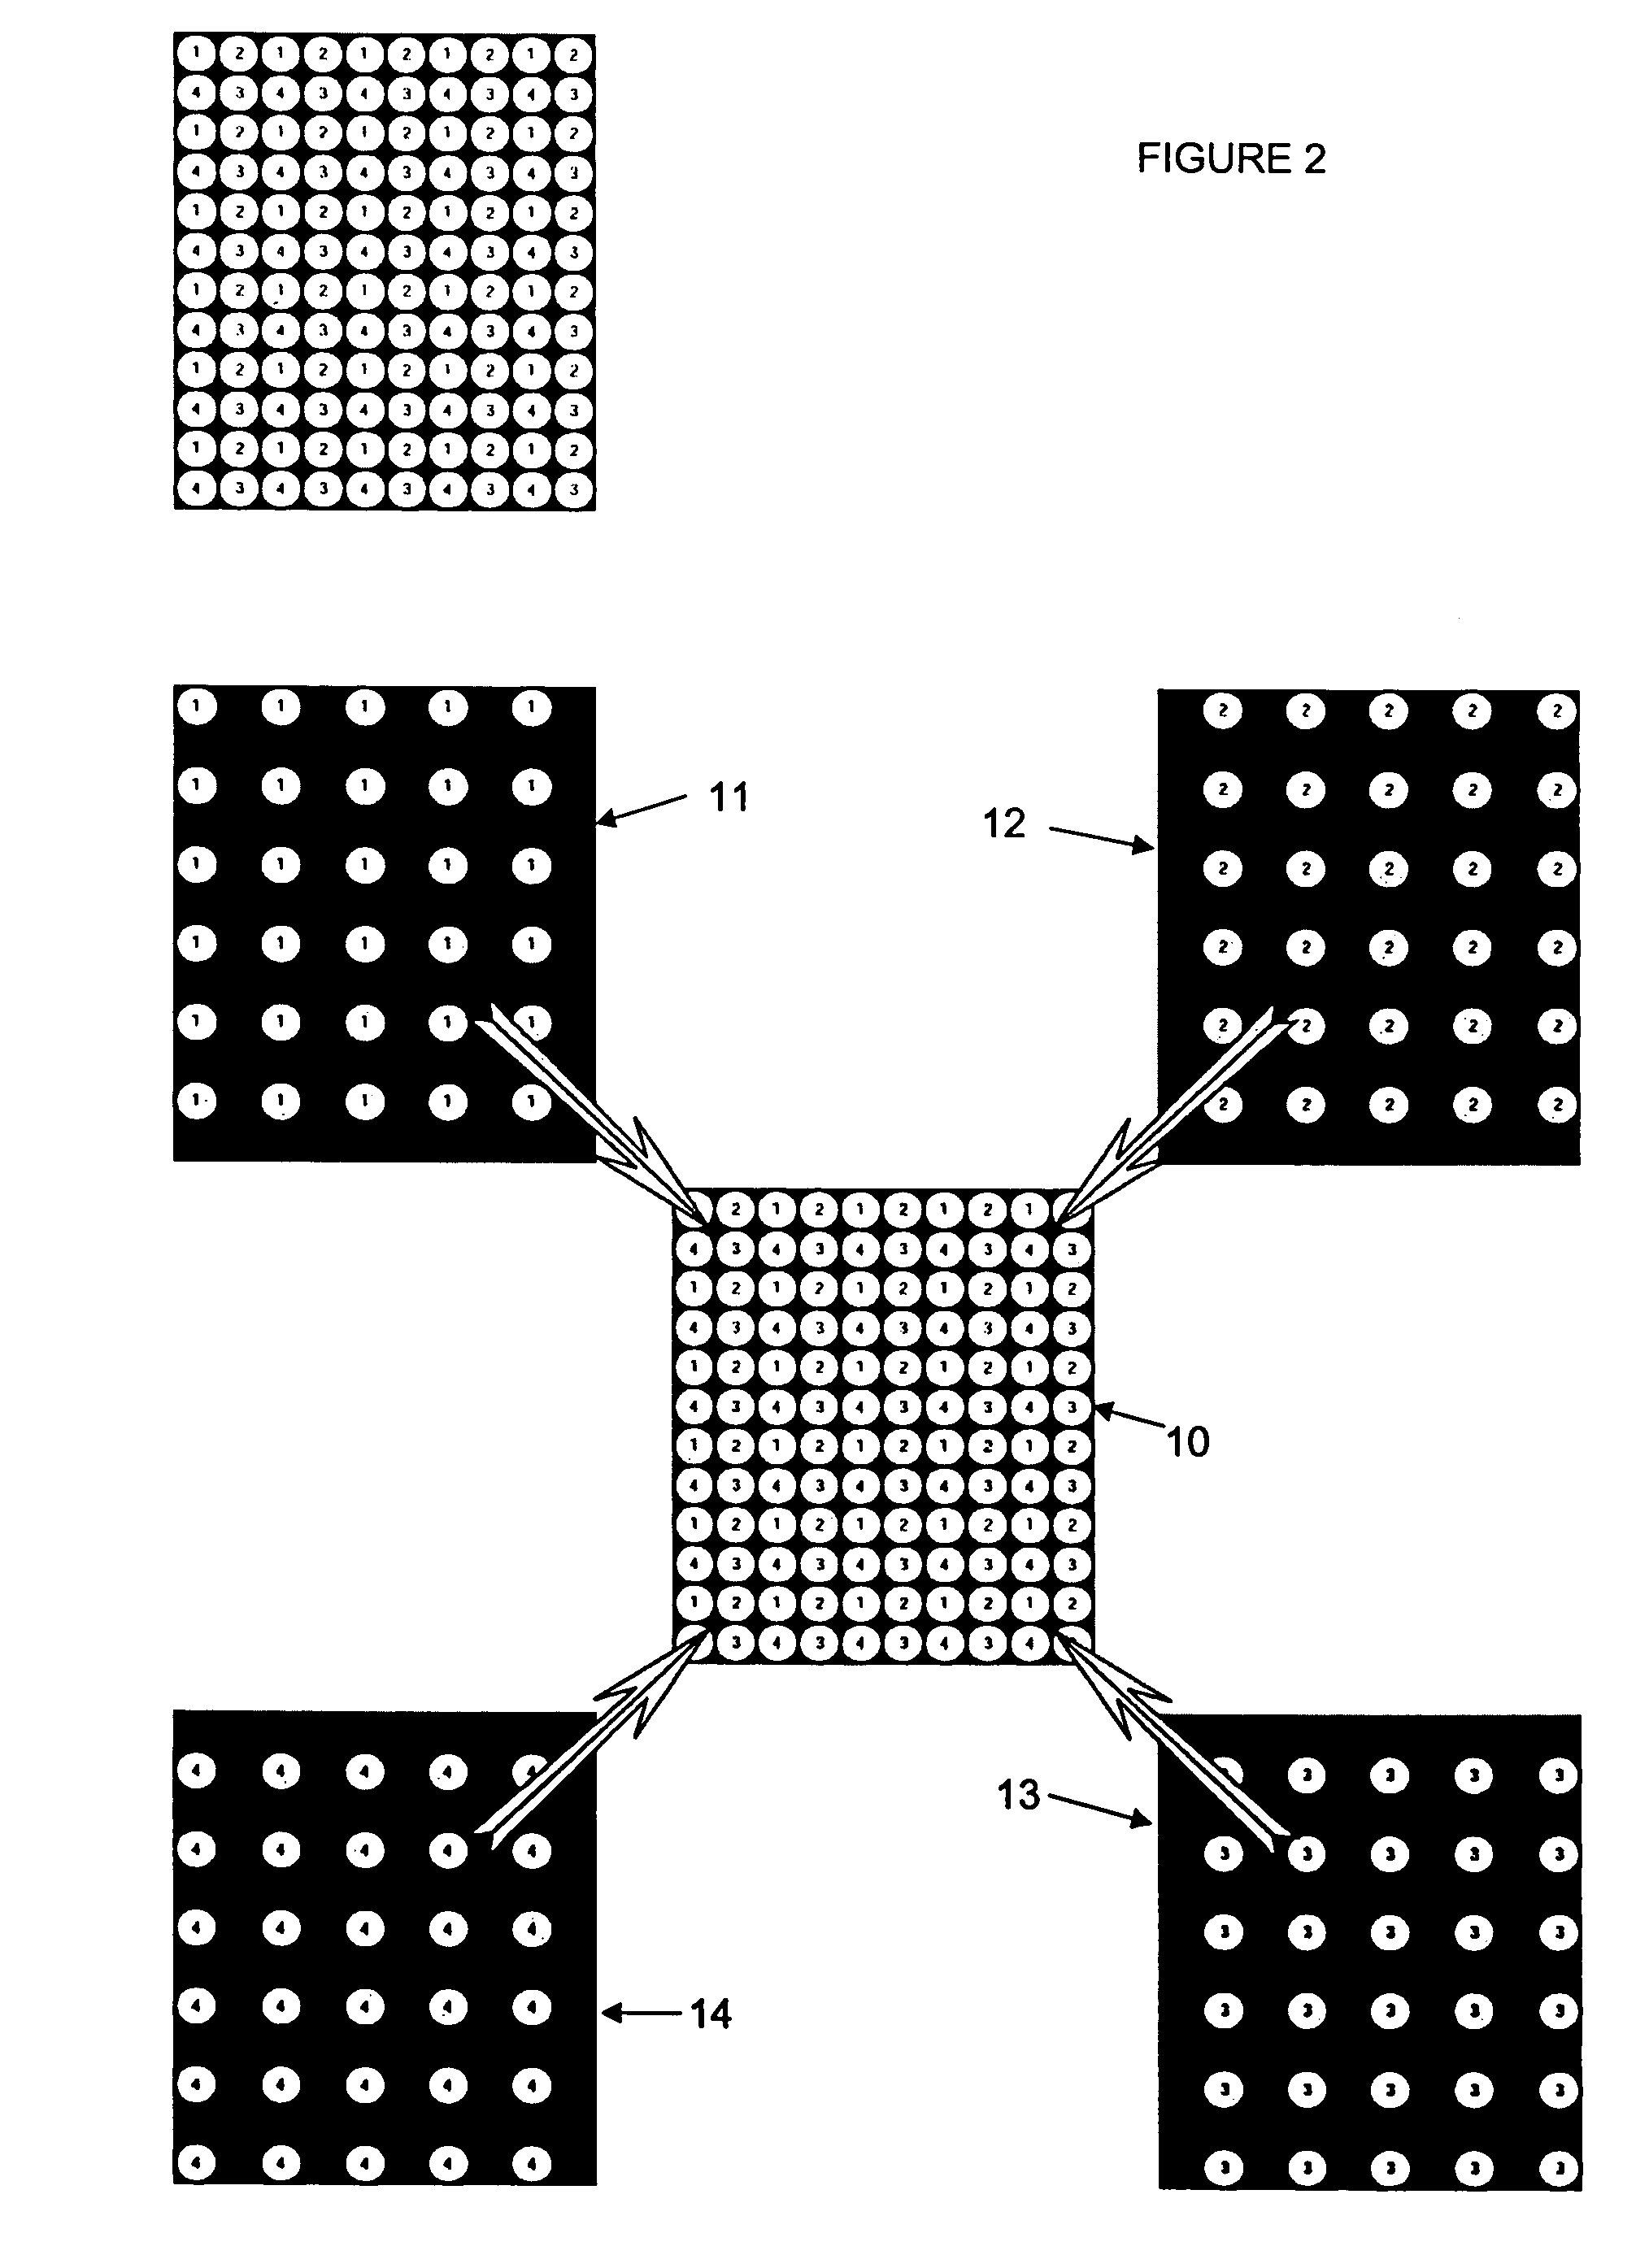 Process for creation and display of merged digital images